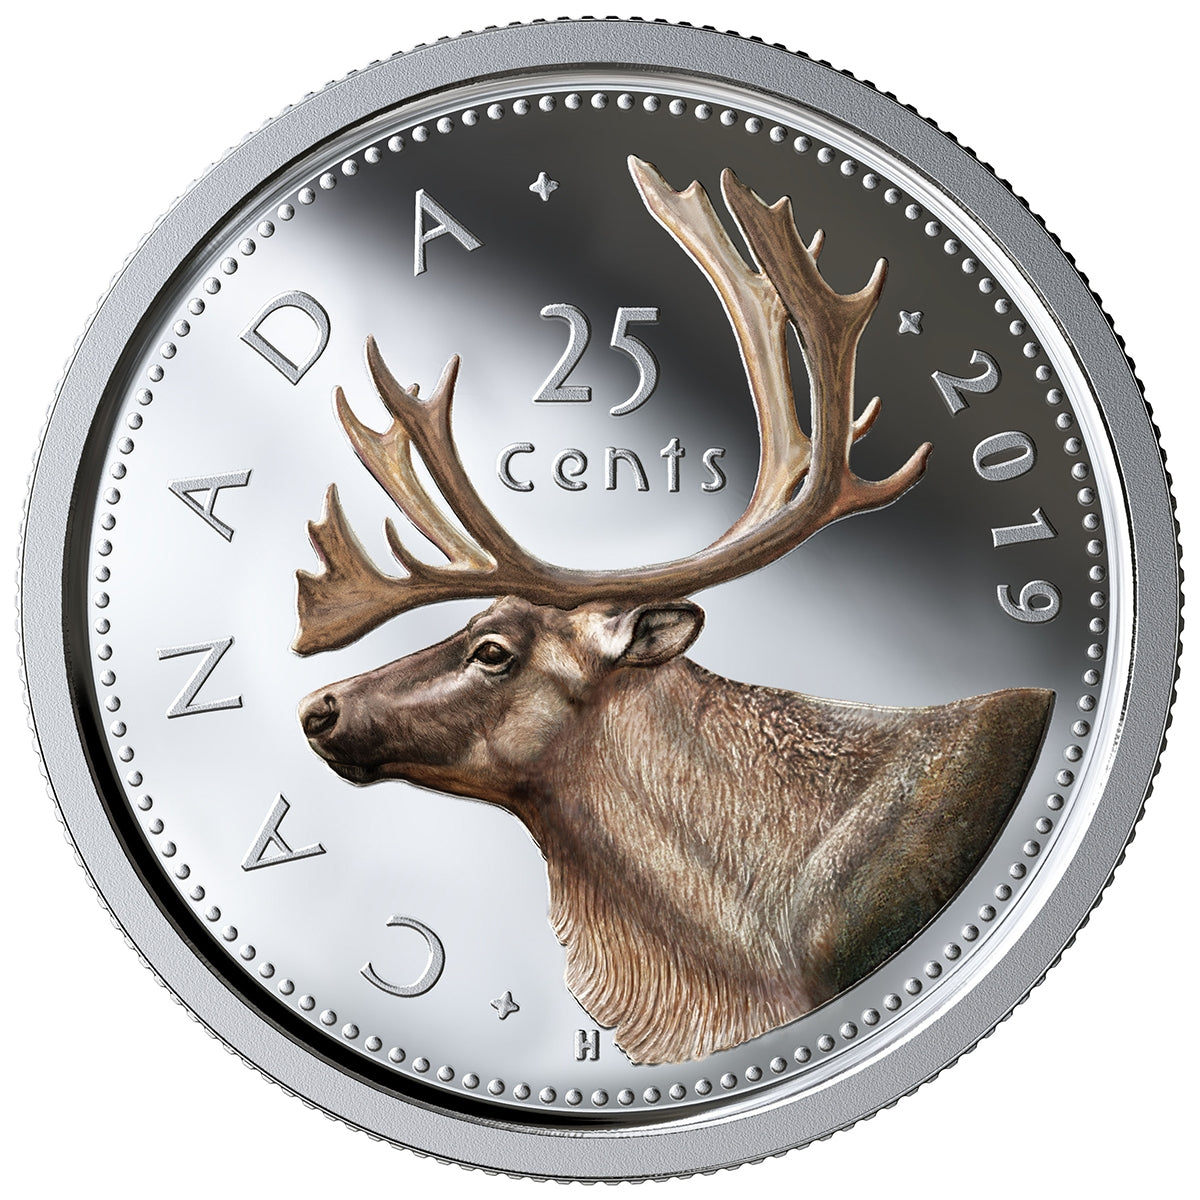 Classic Canadian Coins - Pure Silver Colourised Coin Set (2019)